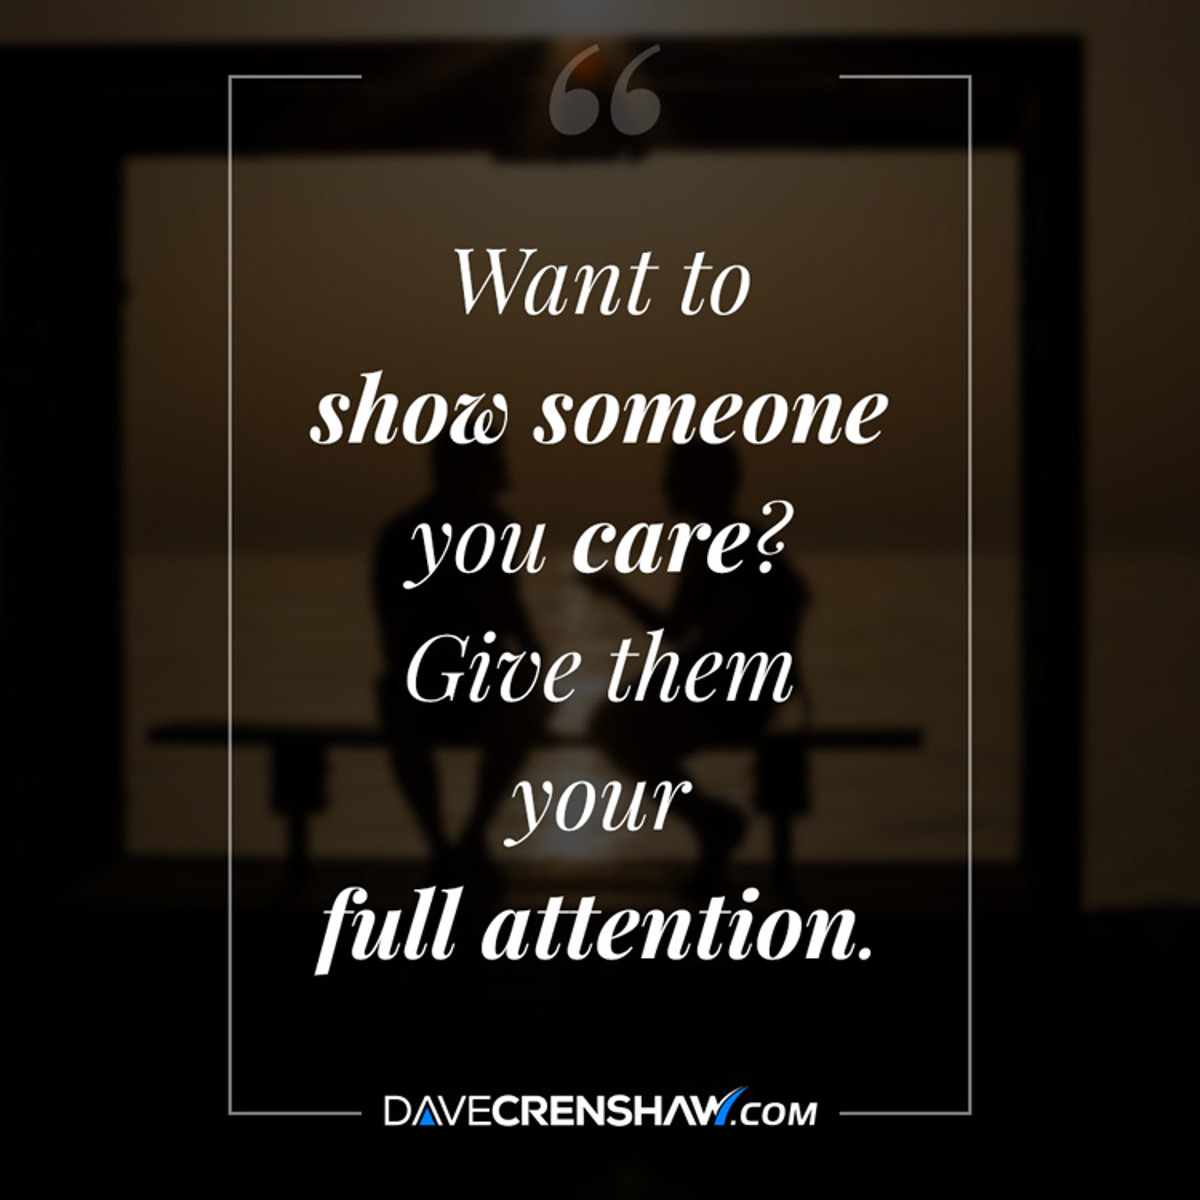 Show someone you care by giving them your FULL attention